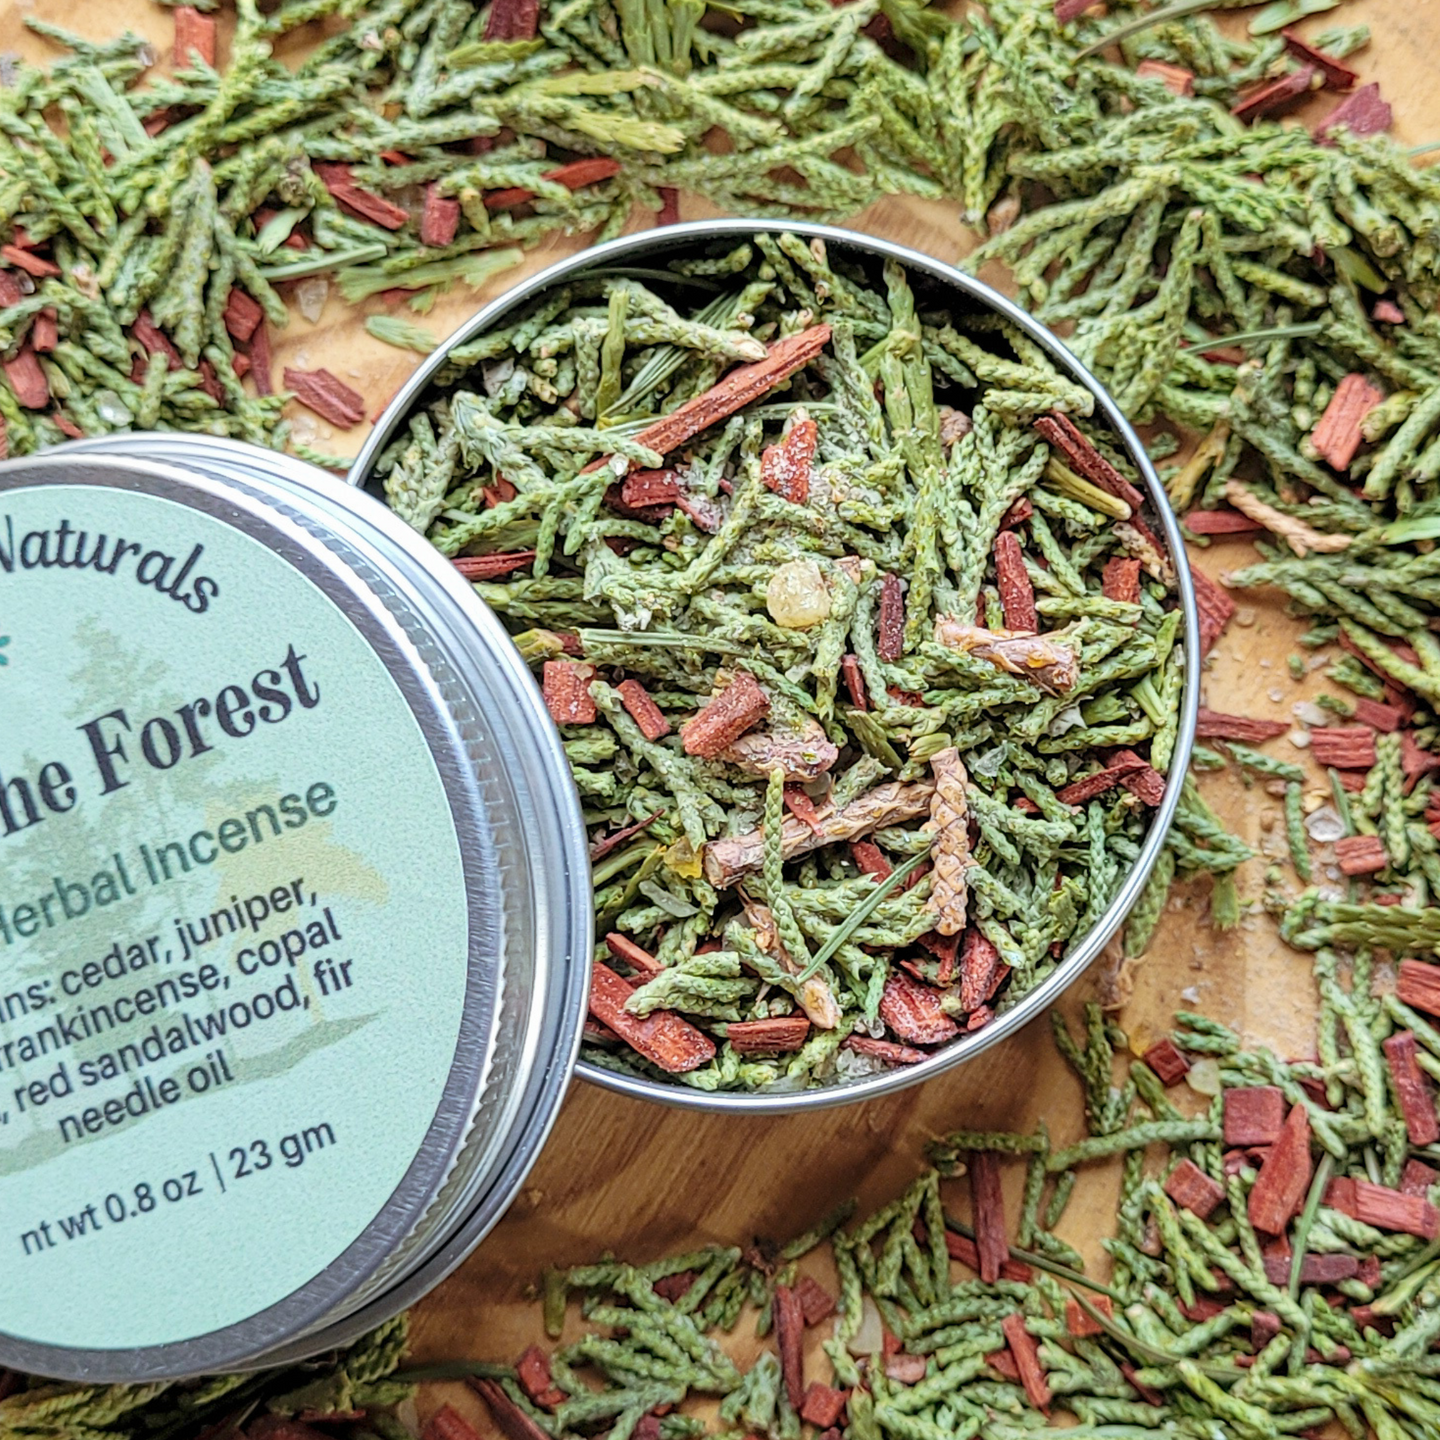 From the forest loose herbal incense blend